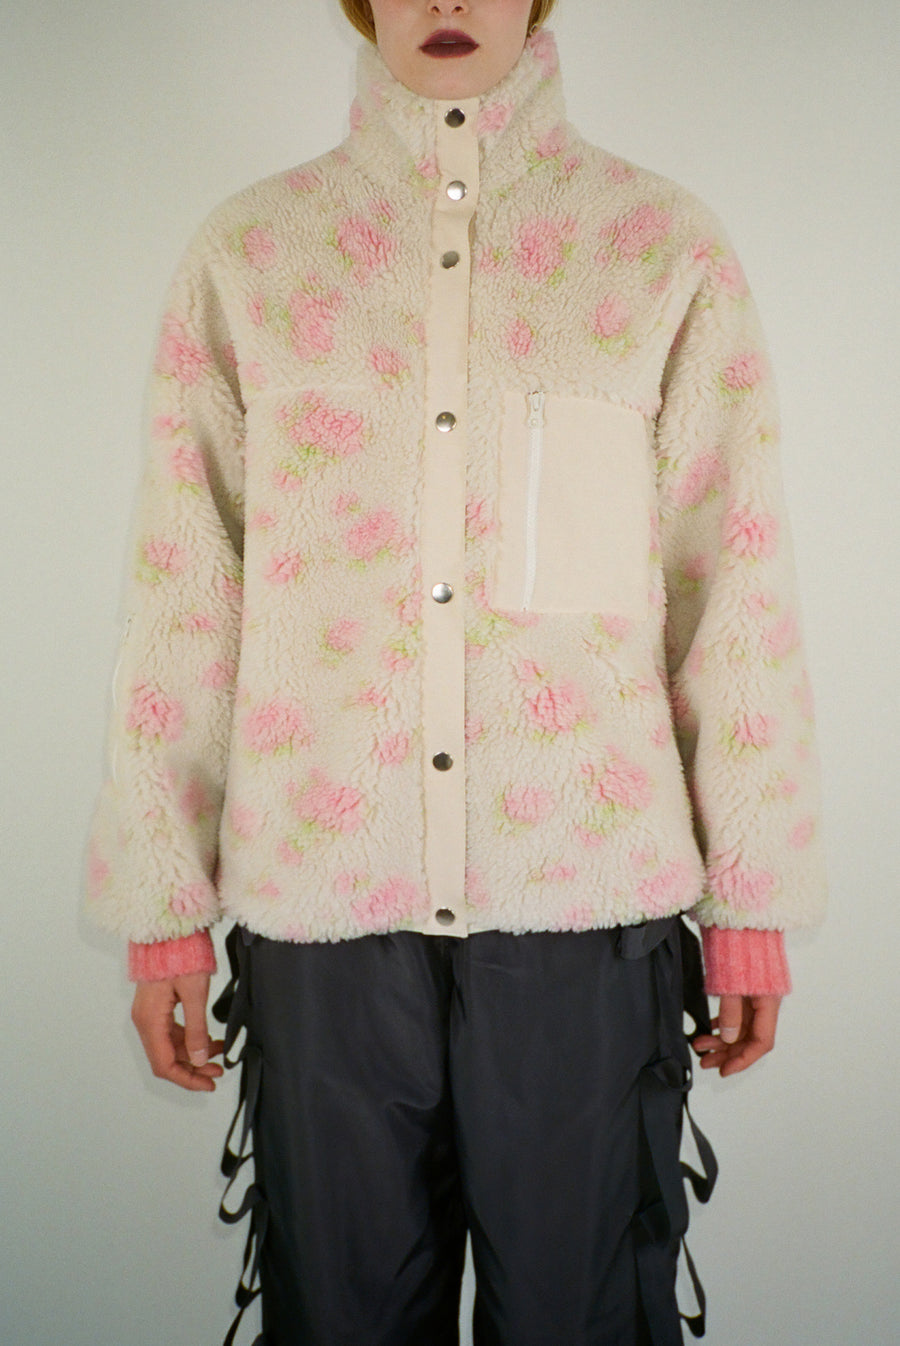 Fleece jacket in cream and pink floral print on model